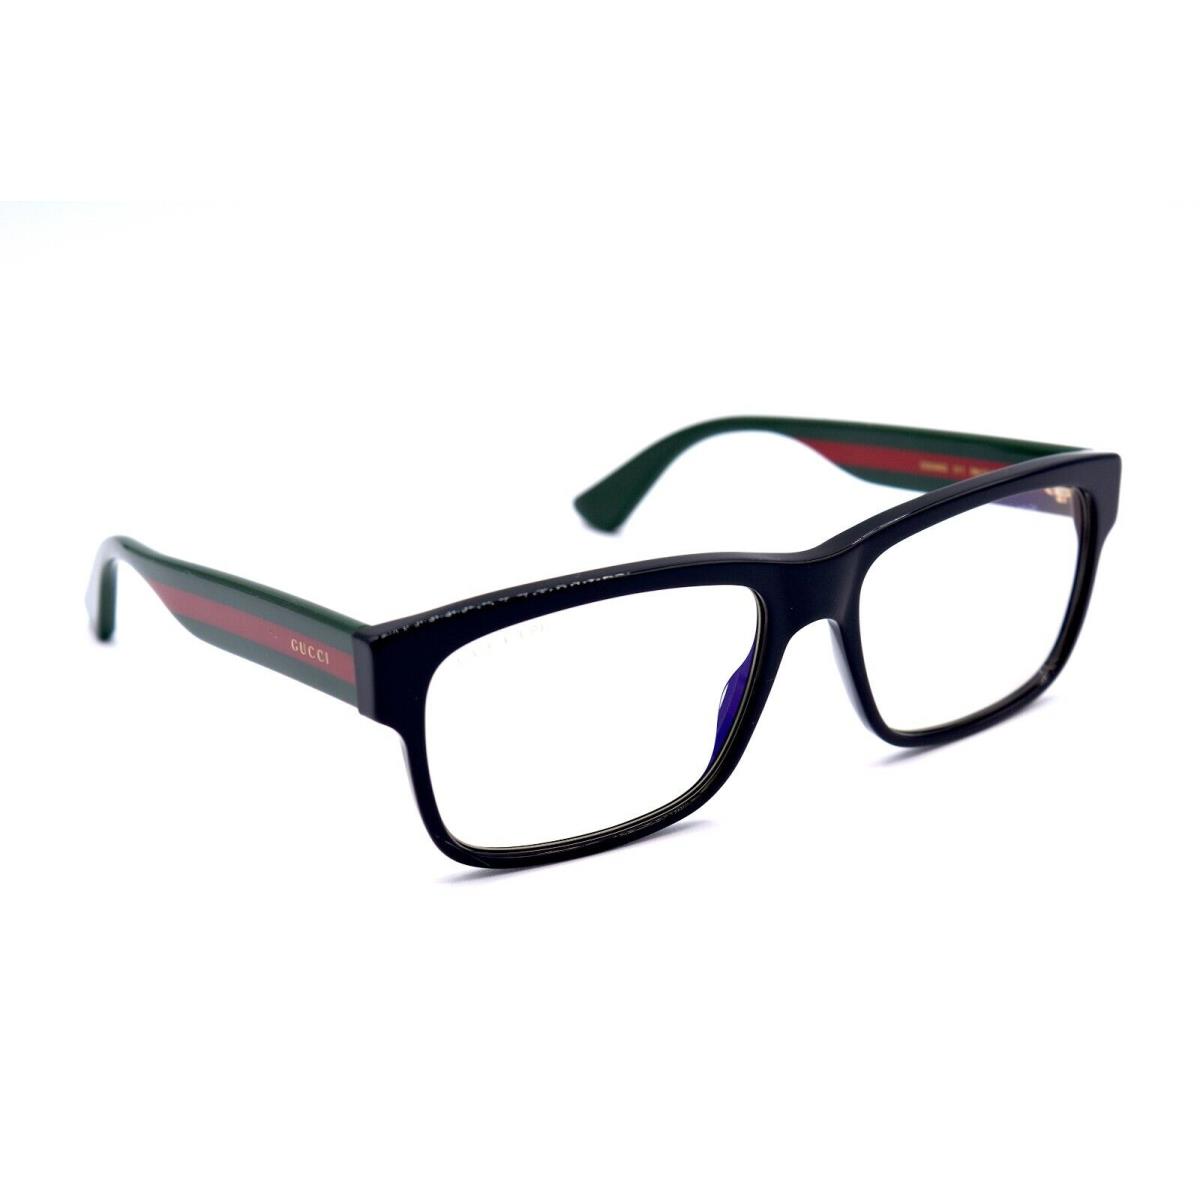 Gucci GG0340S 011 Black Green Eyewear with Transition Lenses/blue AR 58-17  - Gucci sunglasses - 889652124681 | Fash Brands